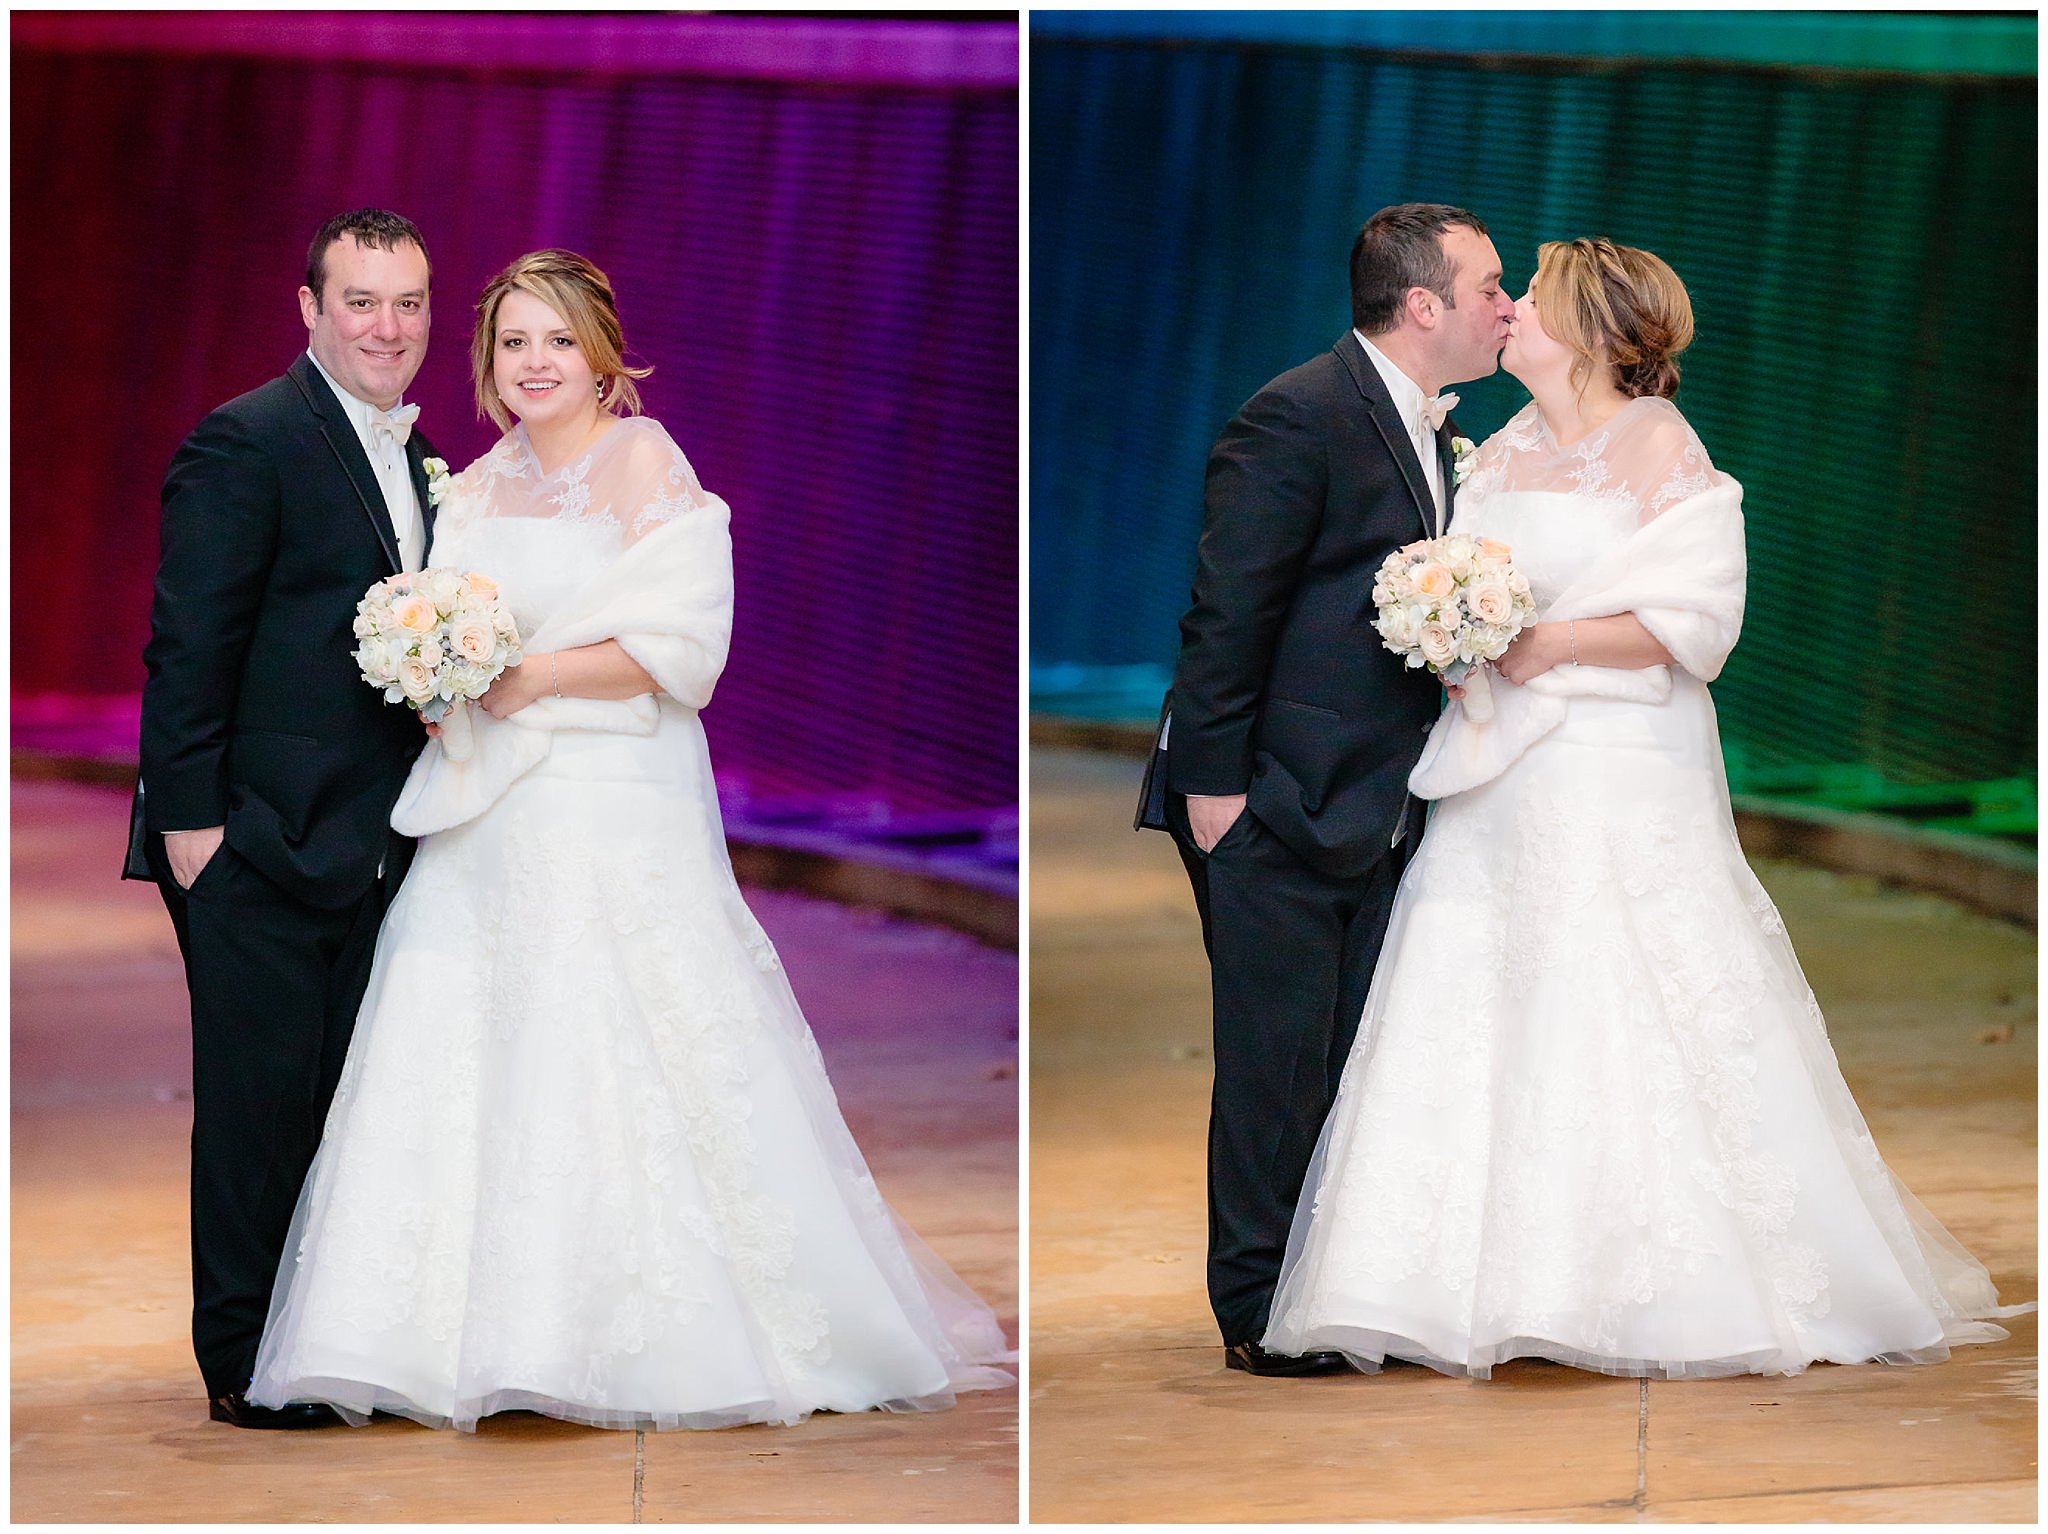 Bride & groom portraits on the colorful walkway under the David L. Lawrence Convention Center walkway